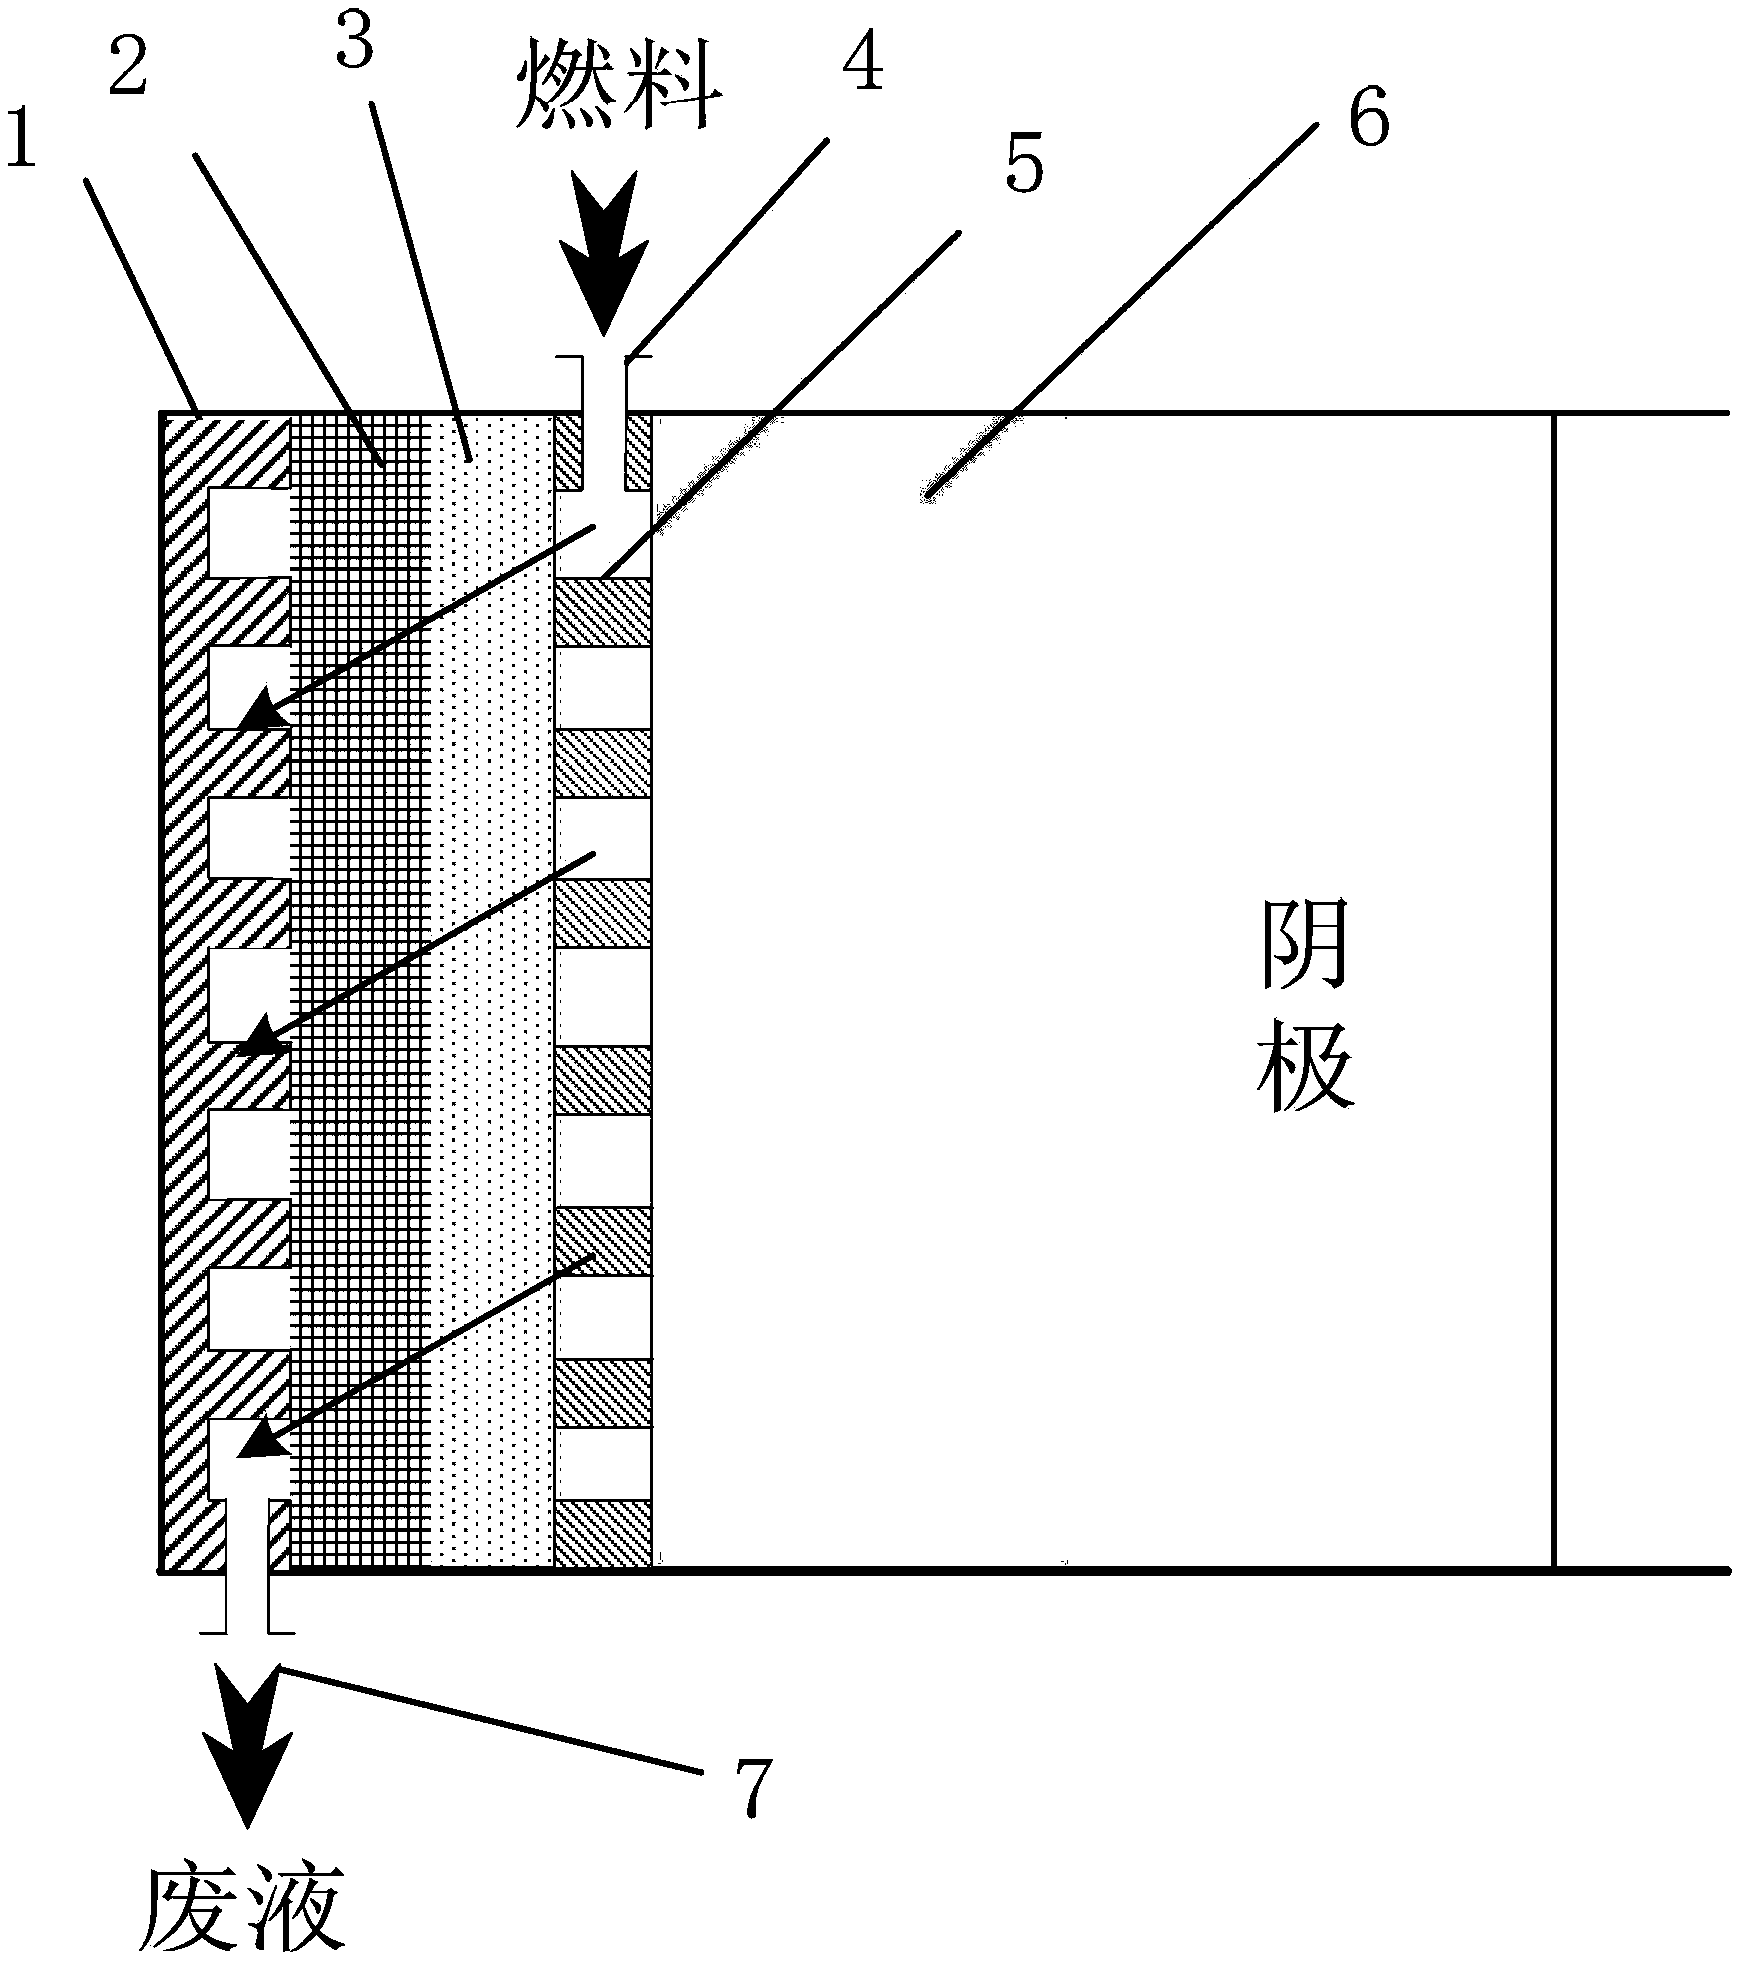 Direct alcohol fuel cell electrode with internal flow field